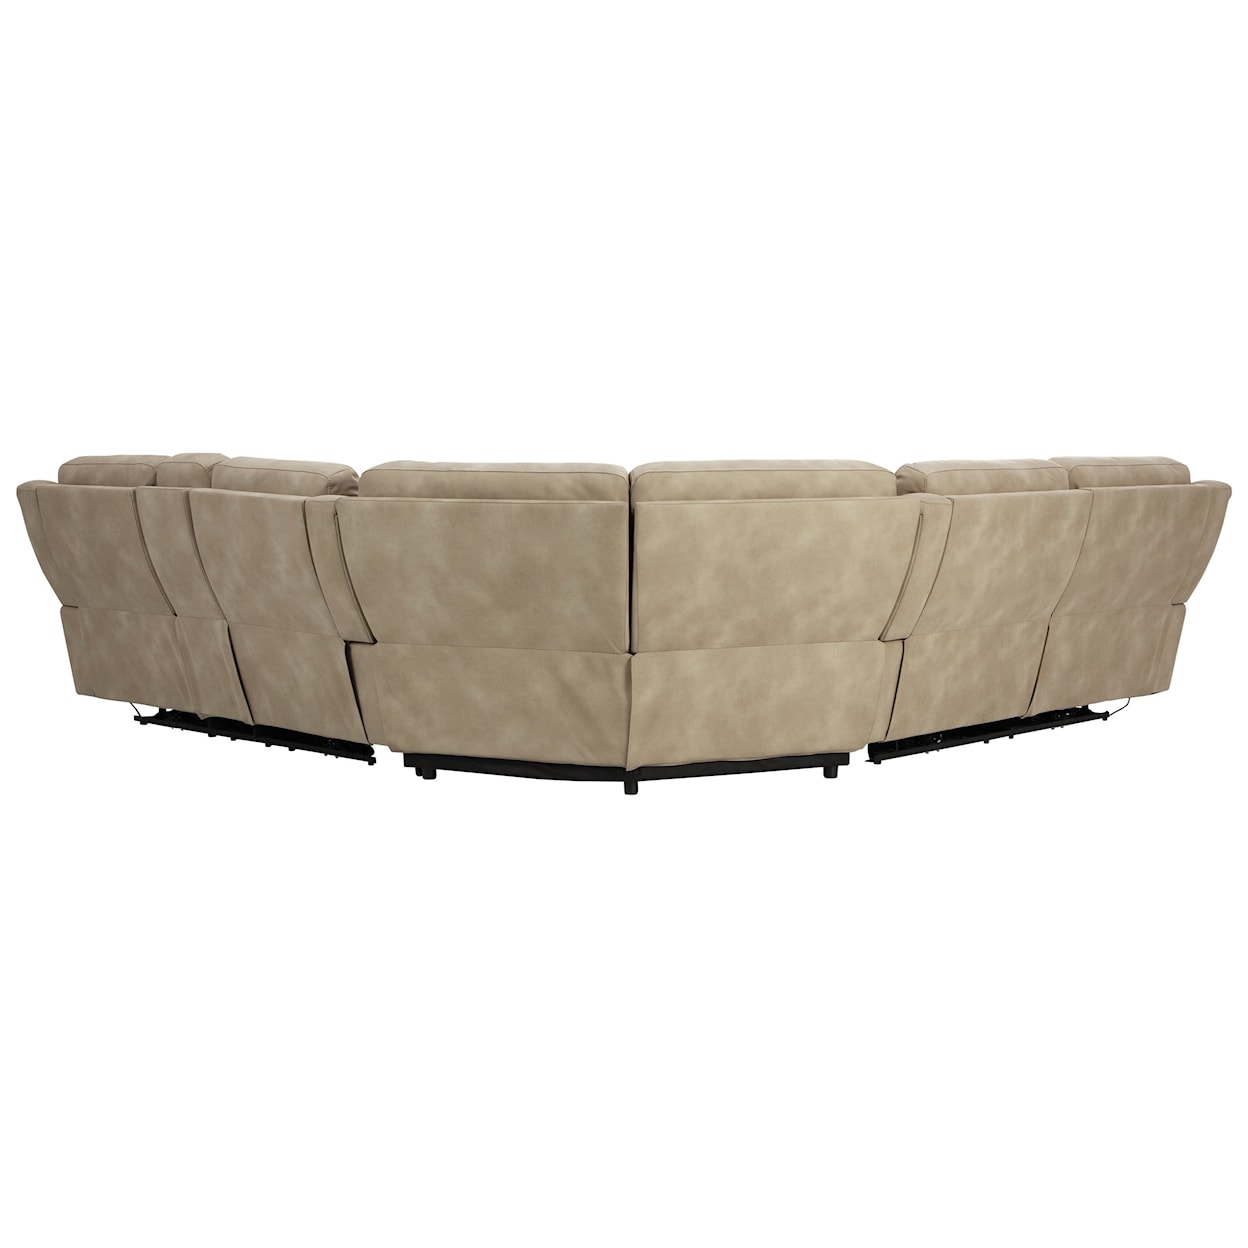 Signature Design by Ashley Furniture Next-Gen DuraPella Pwr Reclining Sectional with Adj Headrests